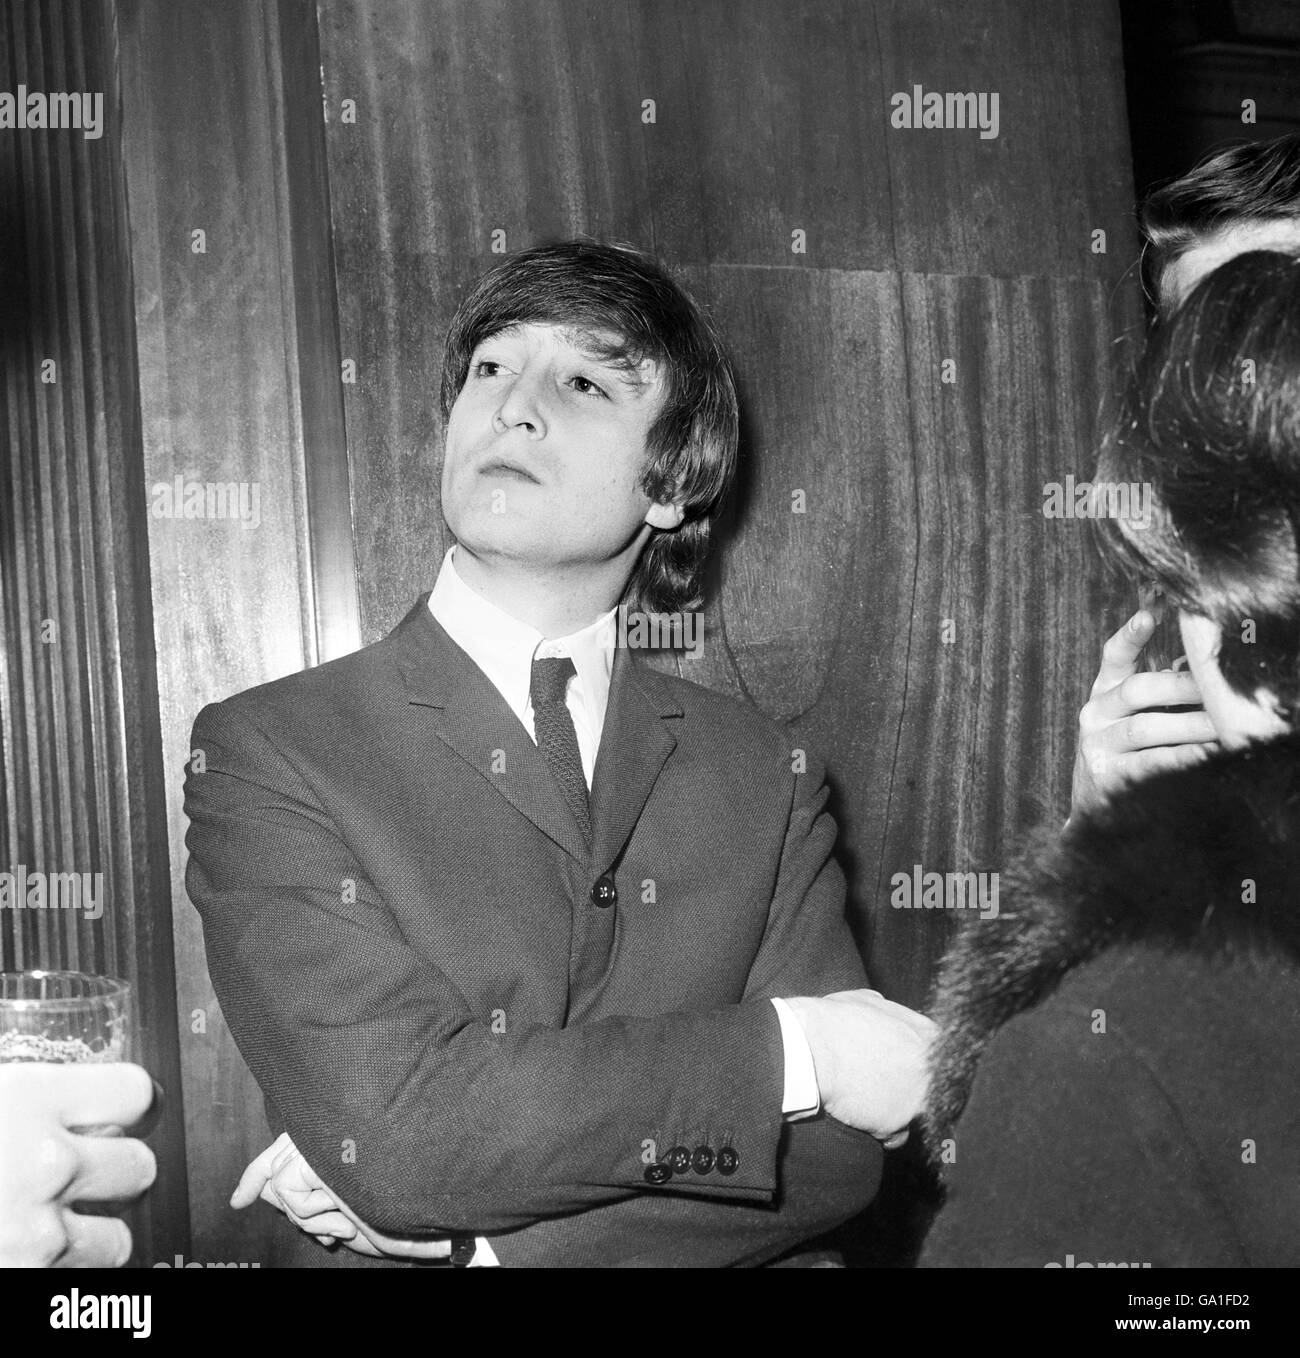 John Lennon of The Beatles during a press conference before a show iat the Gaumont in Kilburn, north London. Stock Photo